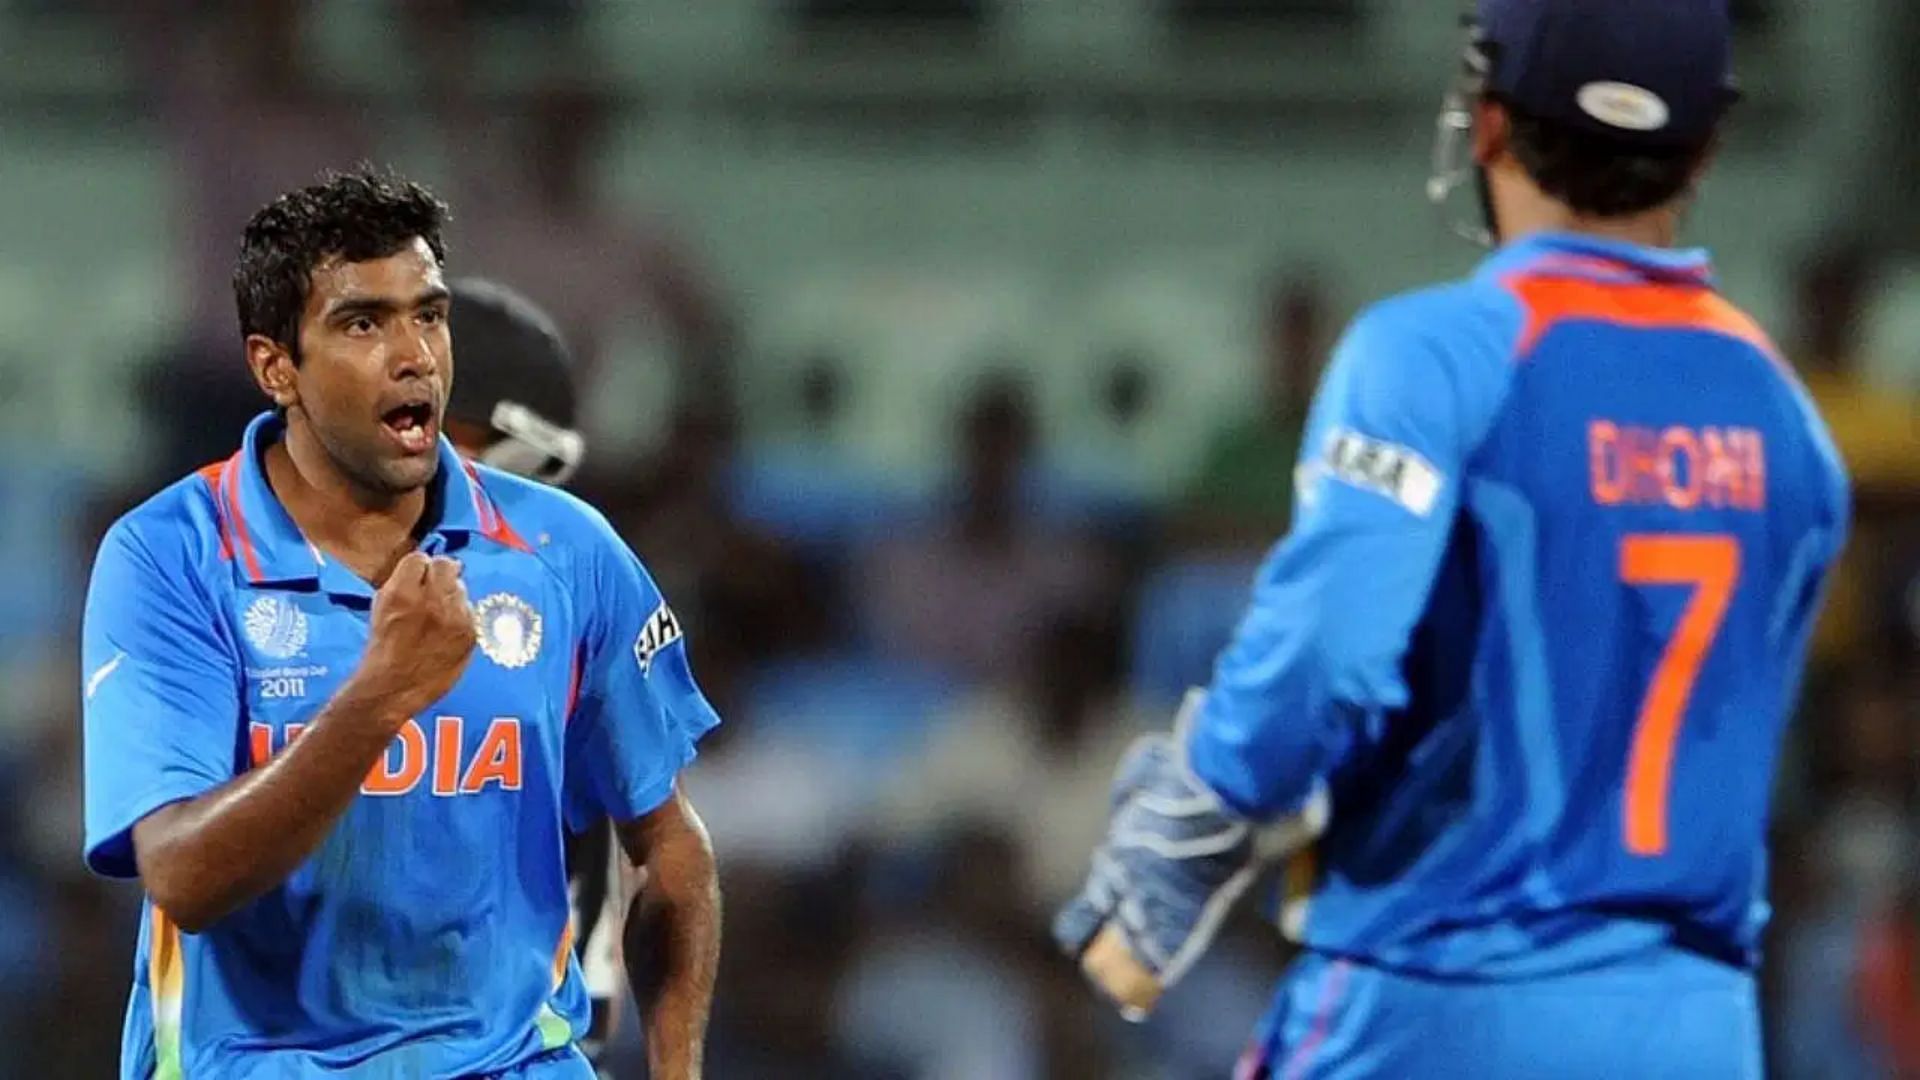 Ravi Ashwin was a key player for India in their 2011 World Cup triumph.